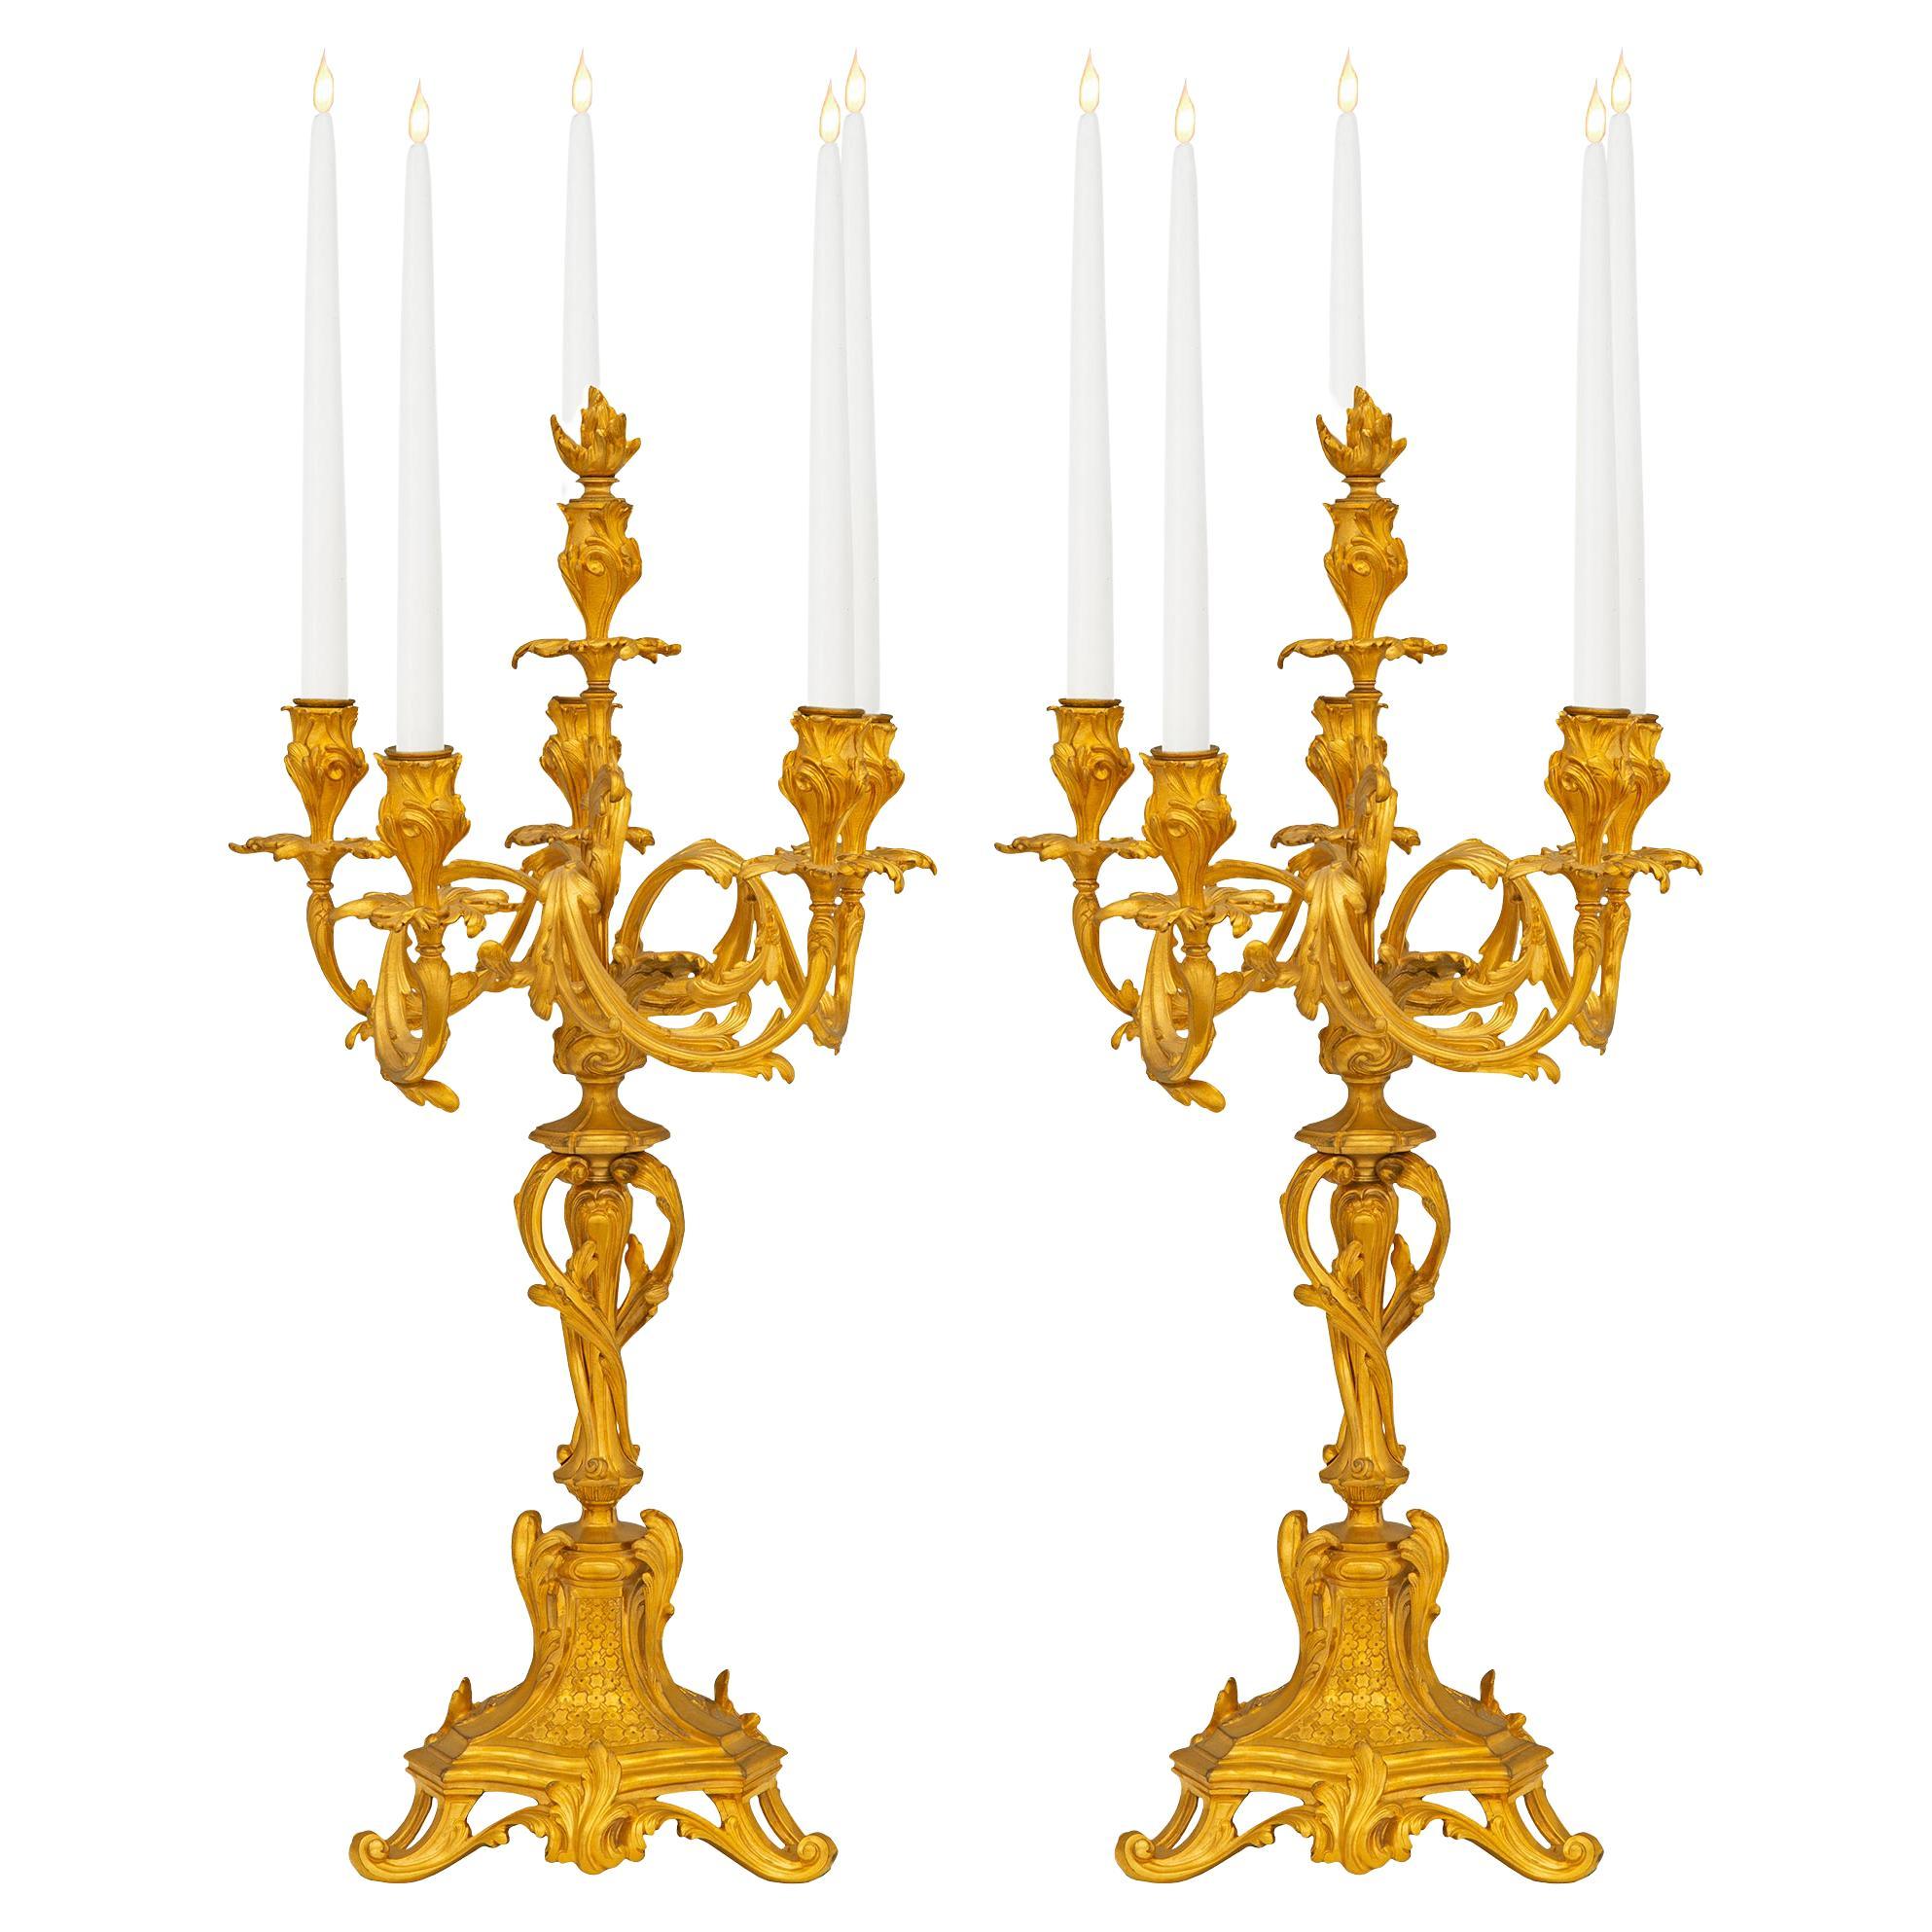 Pair of French Mid-19th Century Louis XV Style Five-Light Ormolu Candelabras For Sale